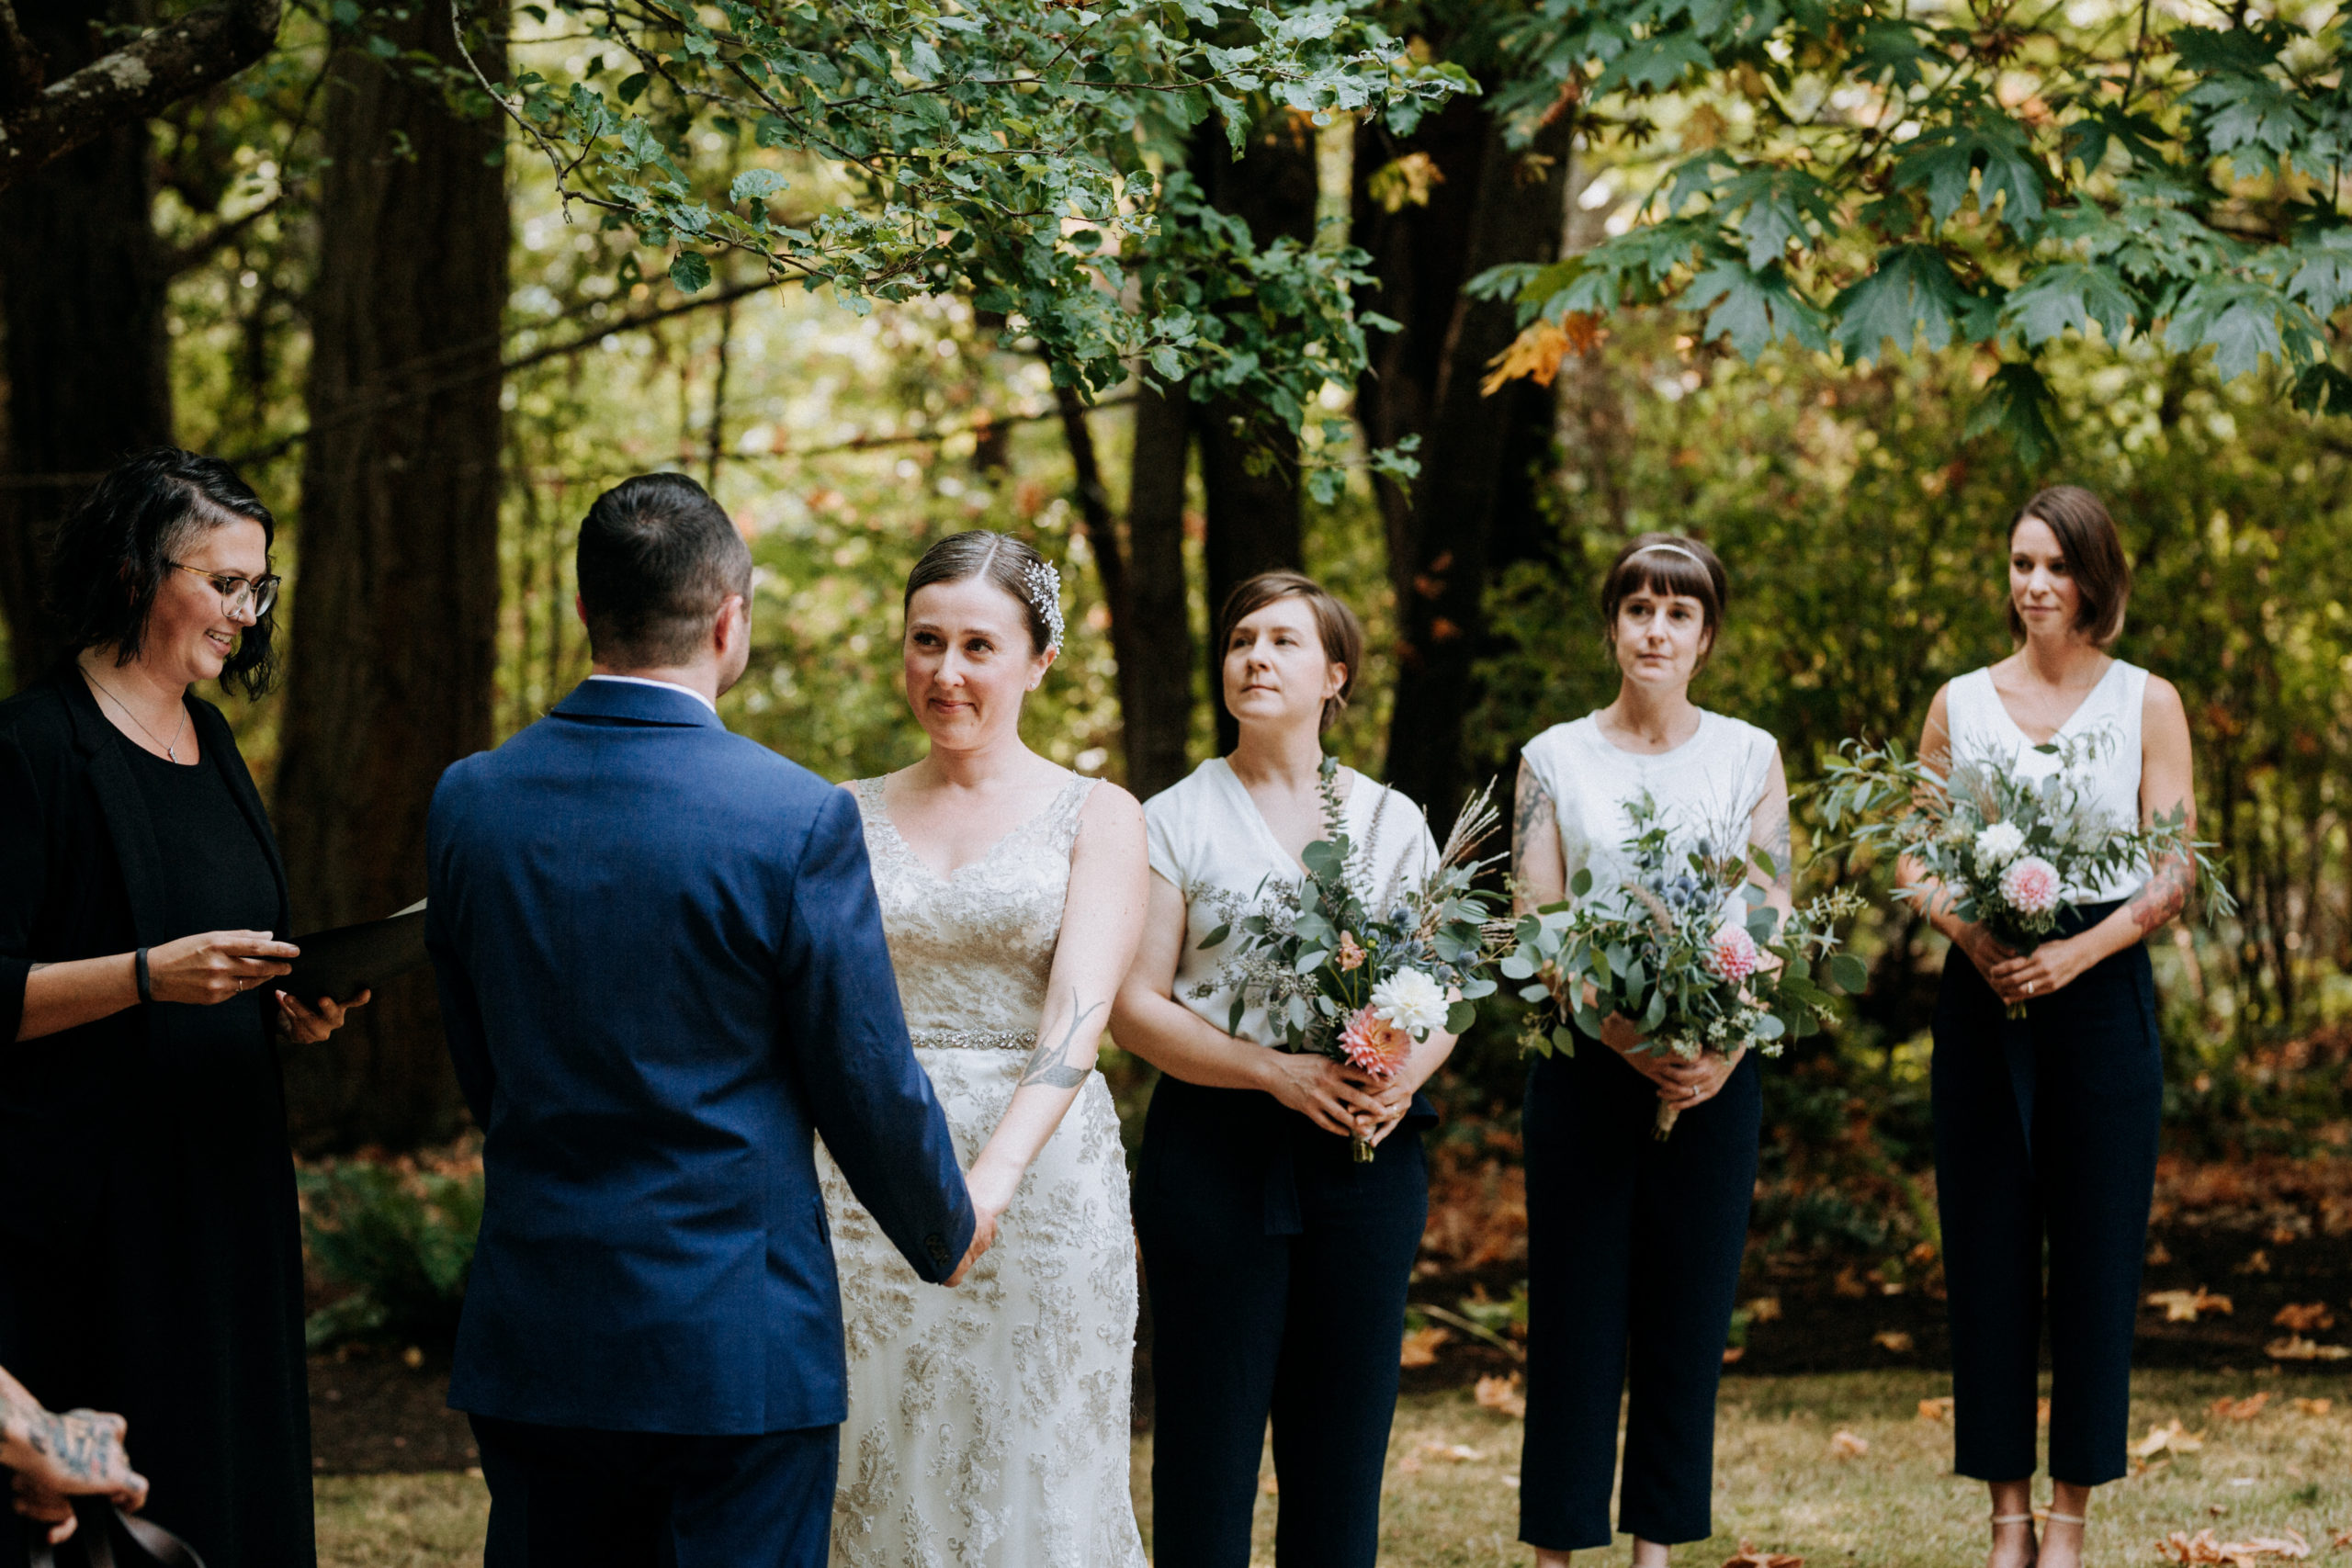 Victoria wedding with Officiant Chris-Ann from Young Hip & Married